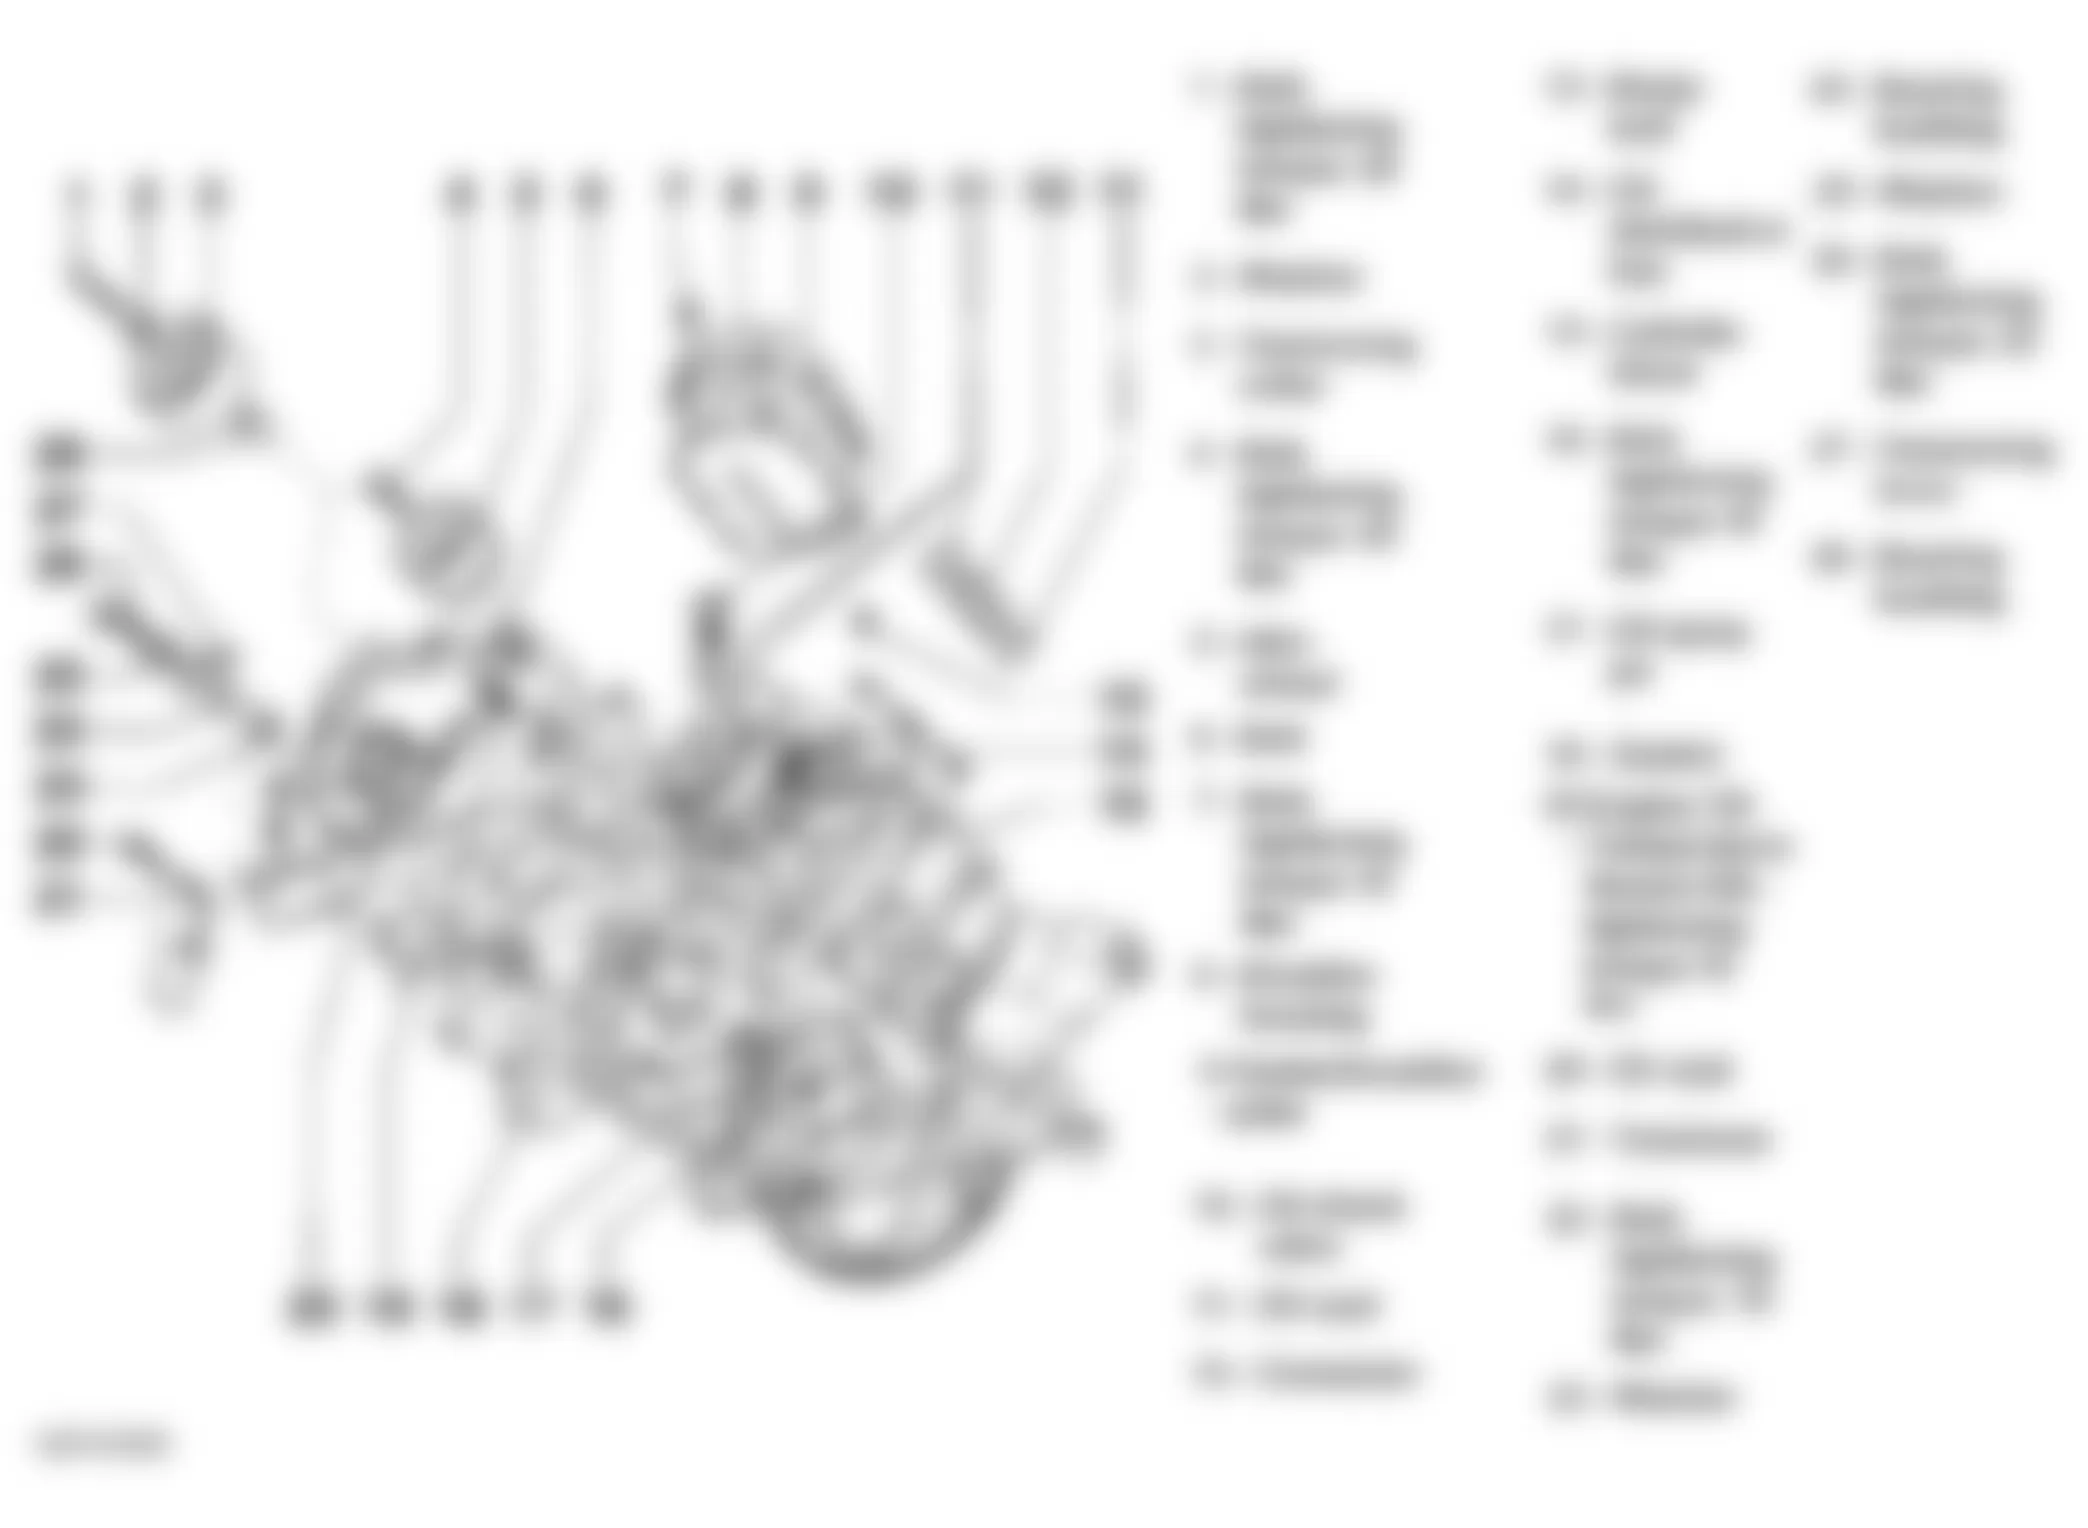 Audi allroad Quattro 2002 - Component Locations -  Exploded View Of Engine Lubrication System